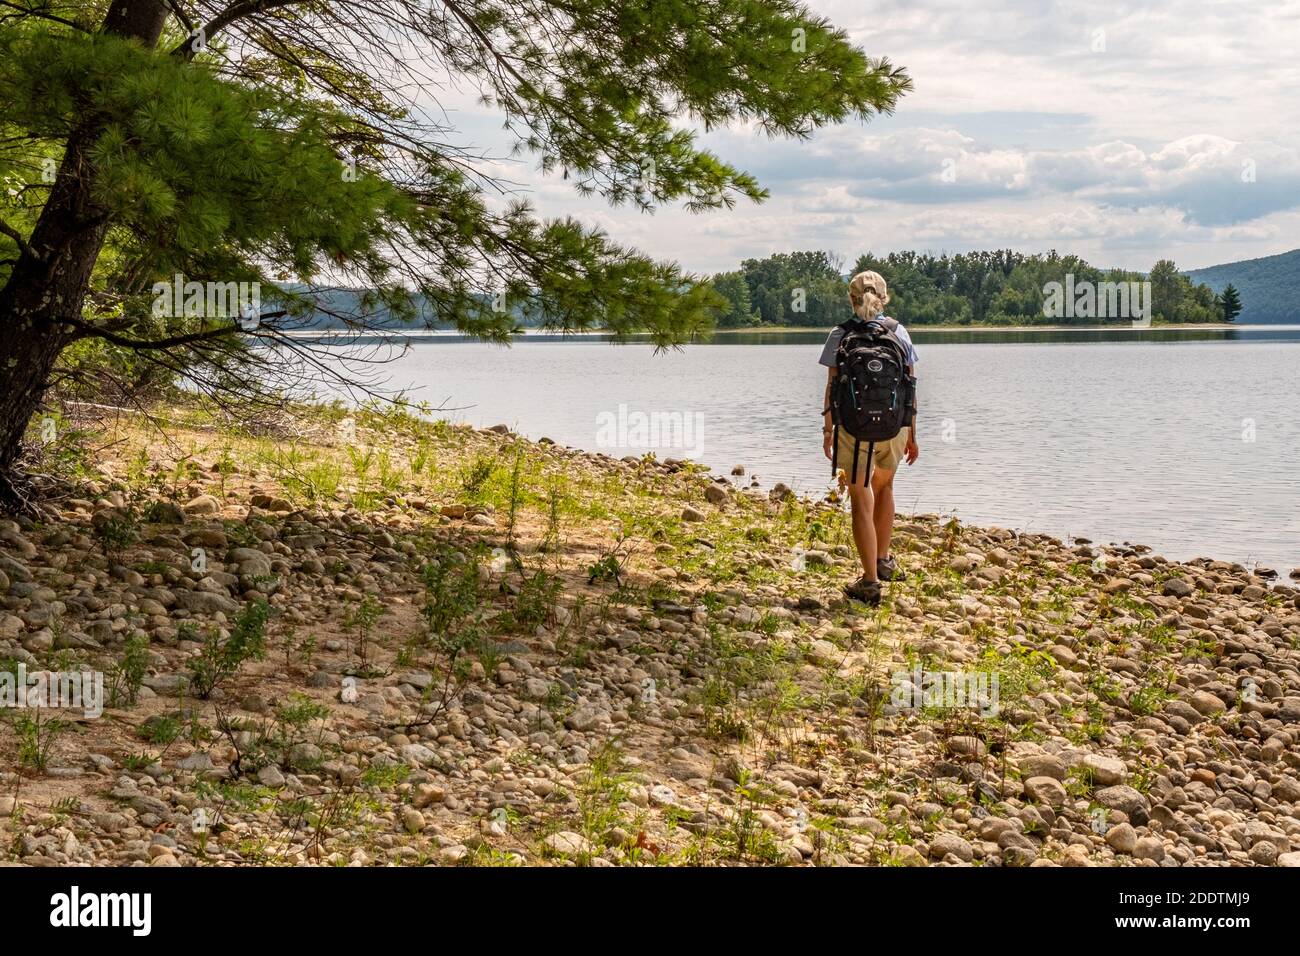 A woman hiking at the waters edge in the Quabbin Reservoir in New Salem, Massachusetts Stock Photo